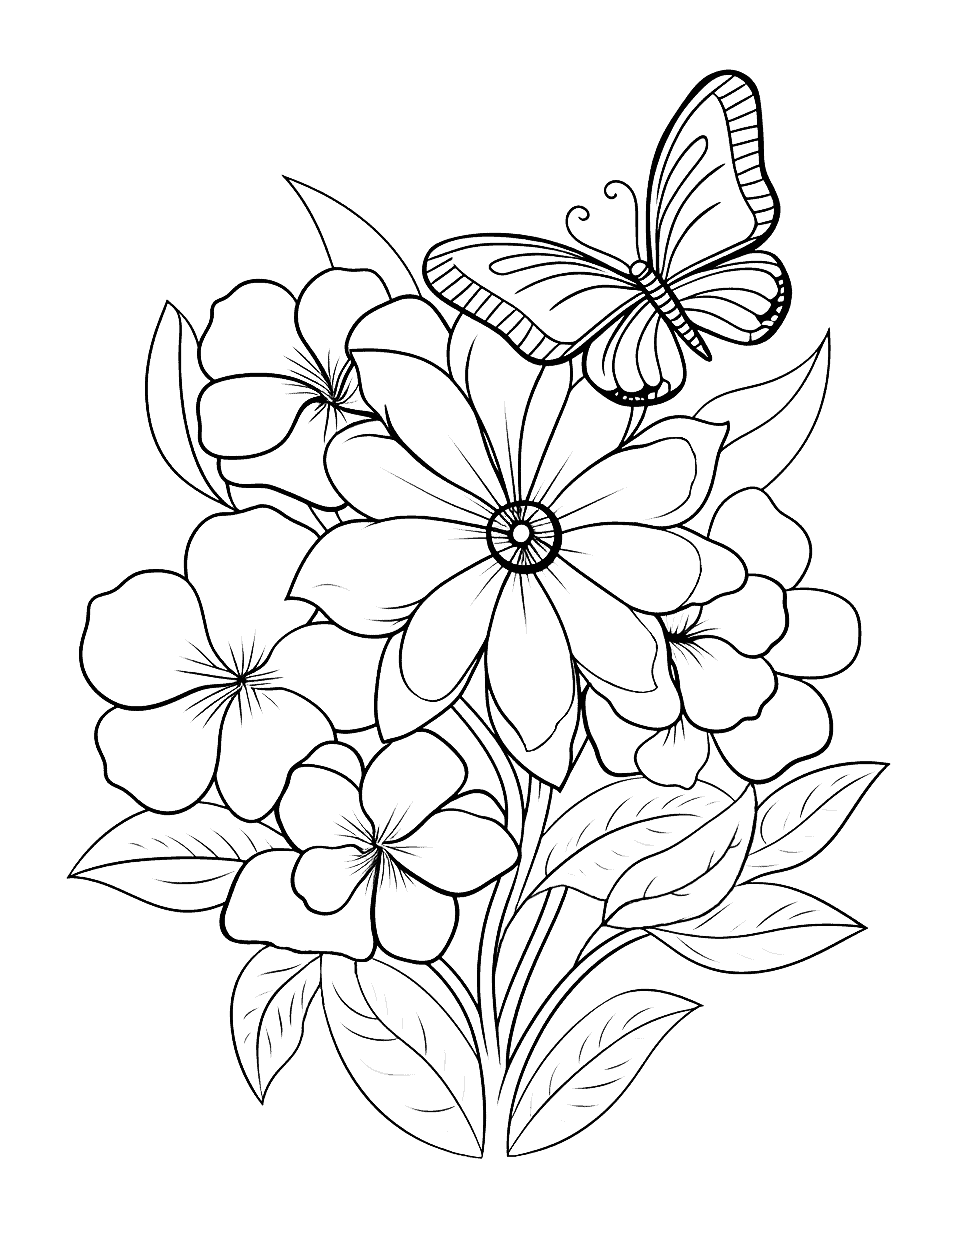 Tropical Flowers and Butterflies Flower Coloring Page - A scene with tropical flowers and cute butterflies.